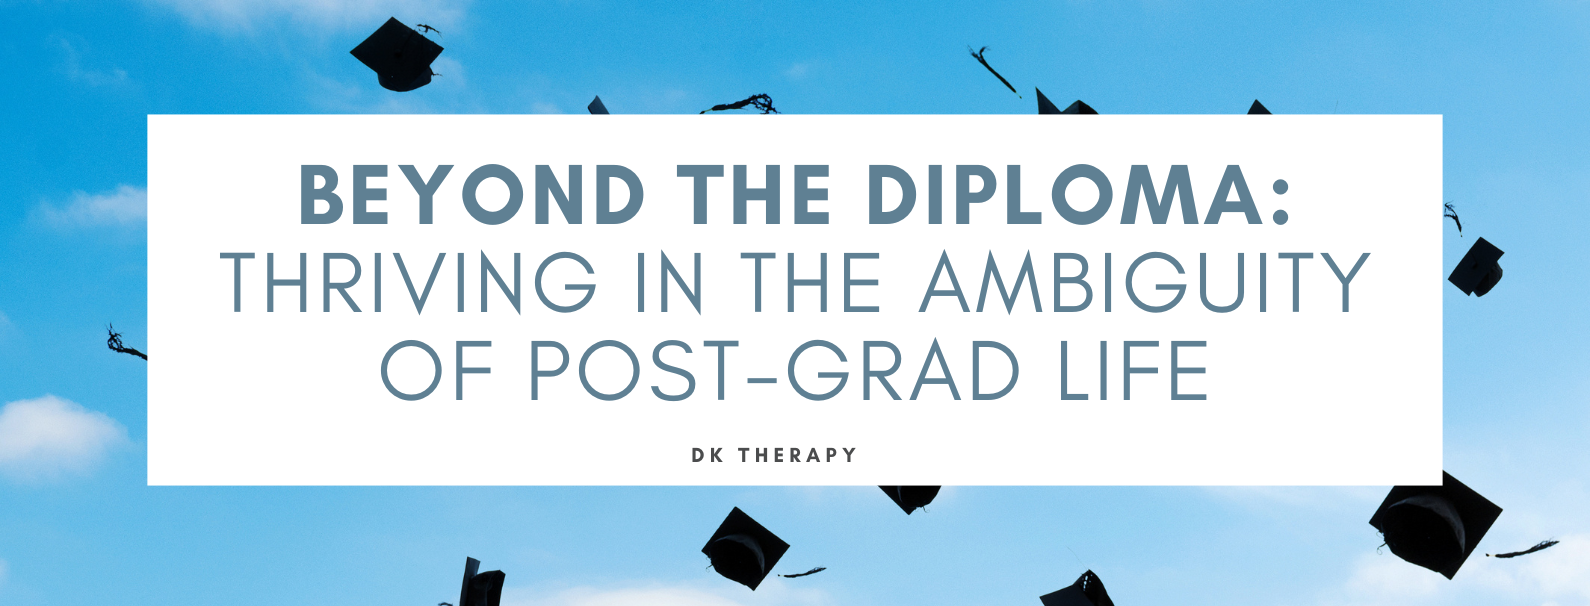 Beyond the Diploma: Thriving in the Ambiguity of Post-Grad Life